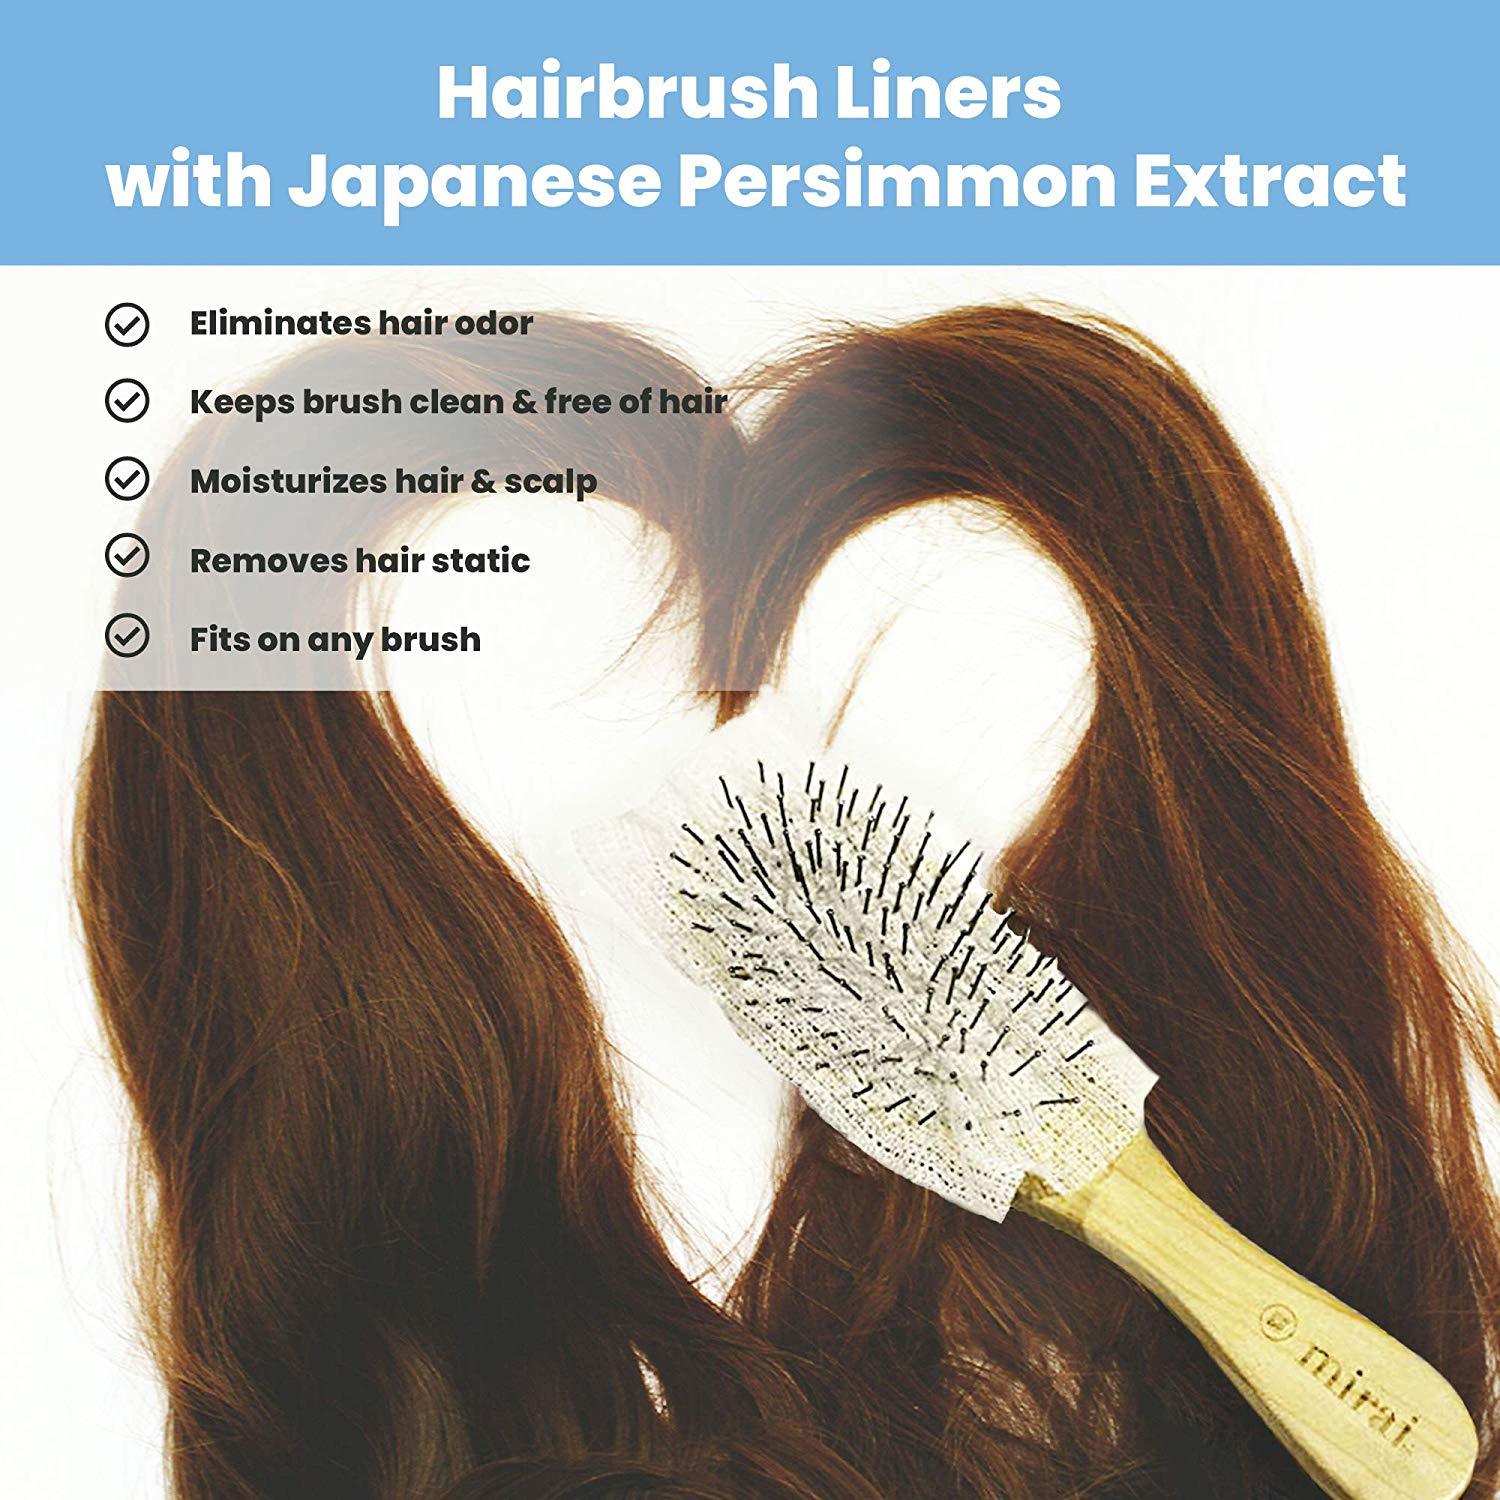 Close-up view of the liner extract designed for Mirai Clinical's hair brush, emphasizing its precision-engineered structure for optimal hair grooming and maintenance.